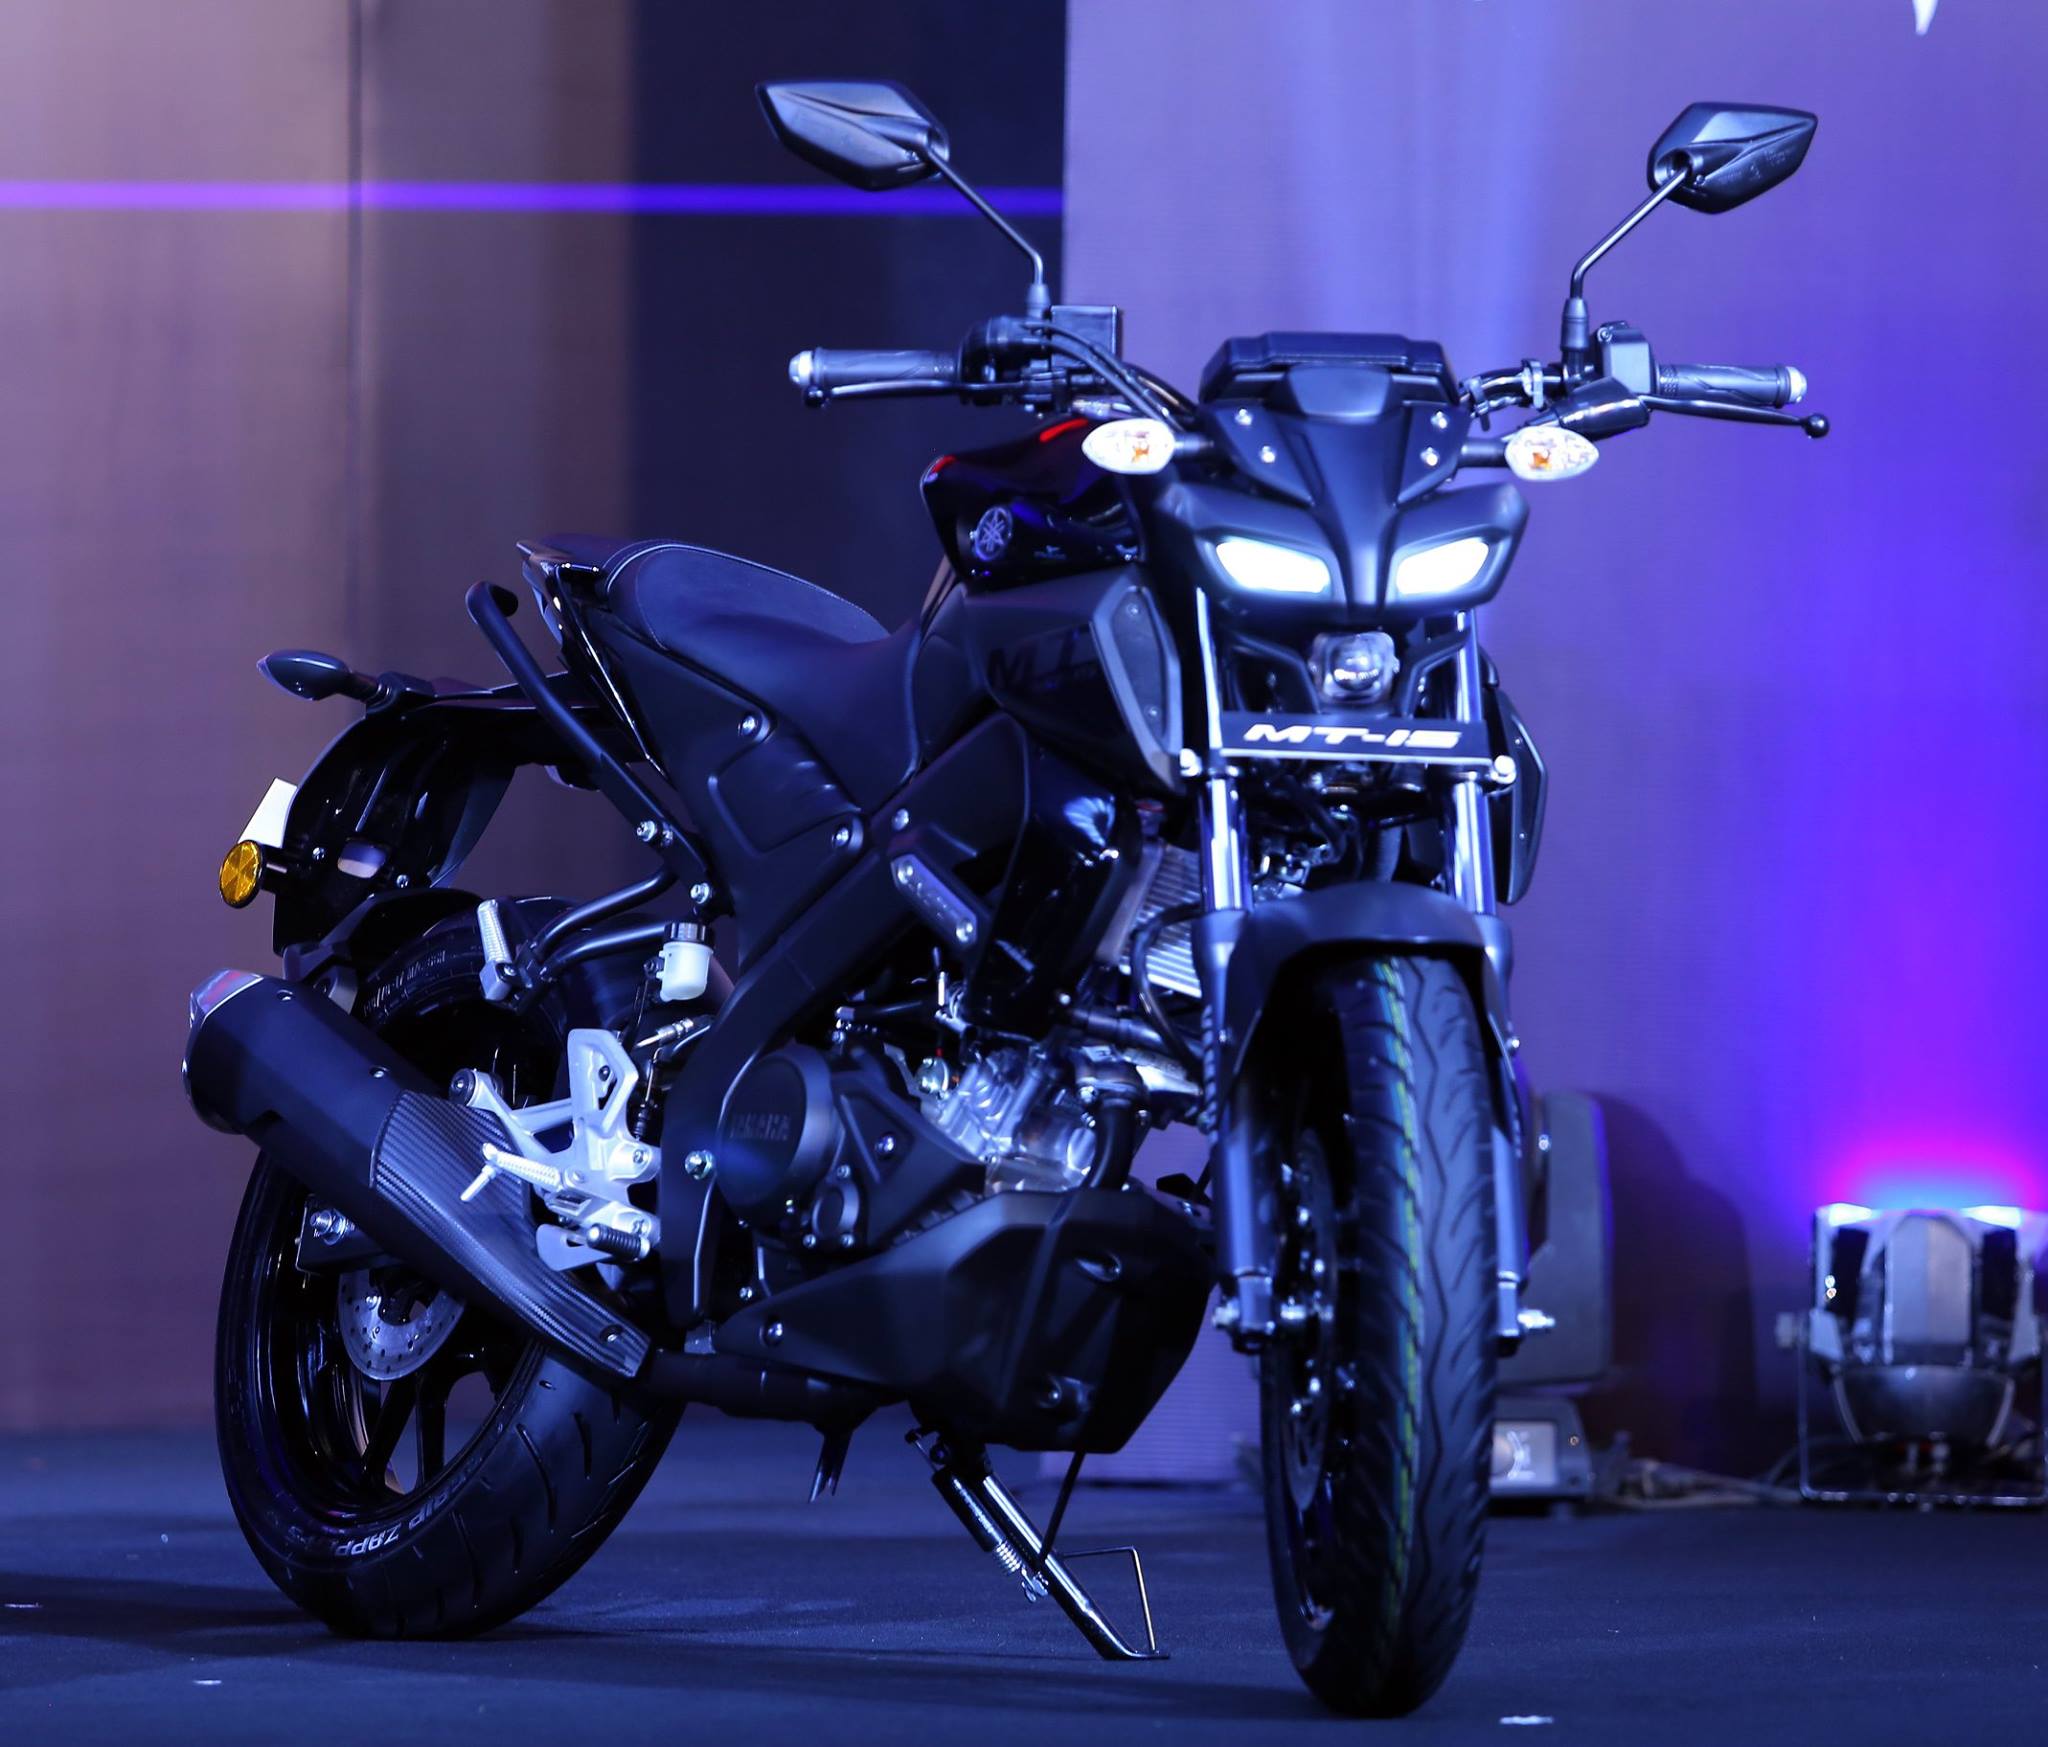 Yamaha MT15 Price in Nepal Revealed! Expected to Launch at NADA Auto